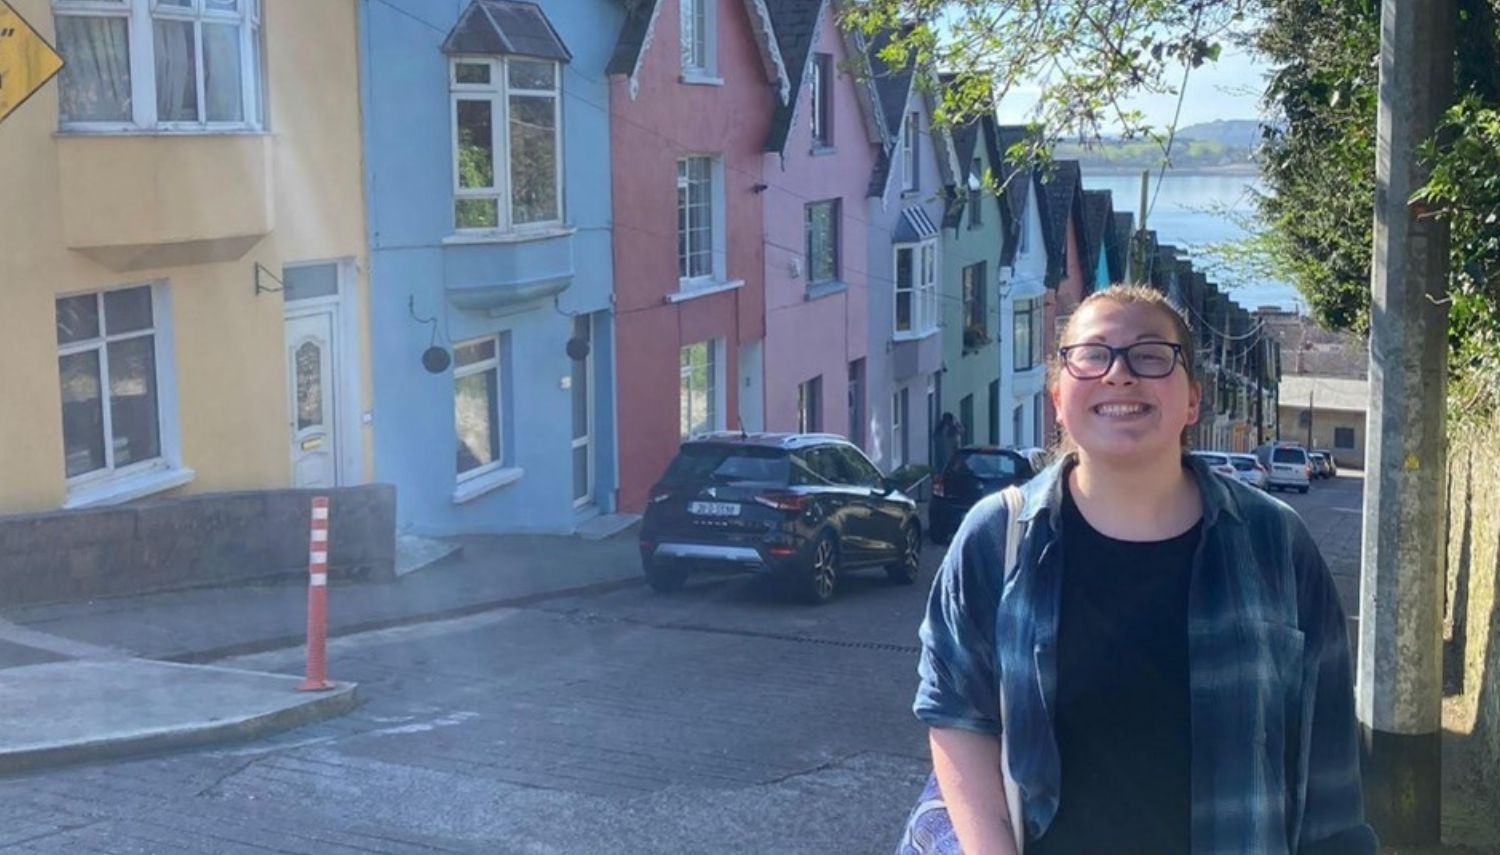 Kendra standing on a street in Cobb, Ireland with colorful buildings behind her - Kendra Familette’s Semester in Ireland - Department of Forestry and Environmental Resources at NC State